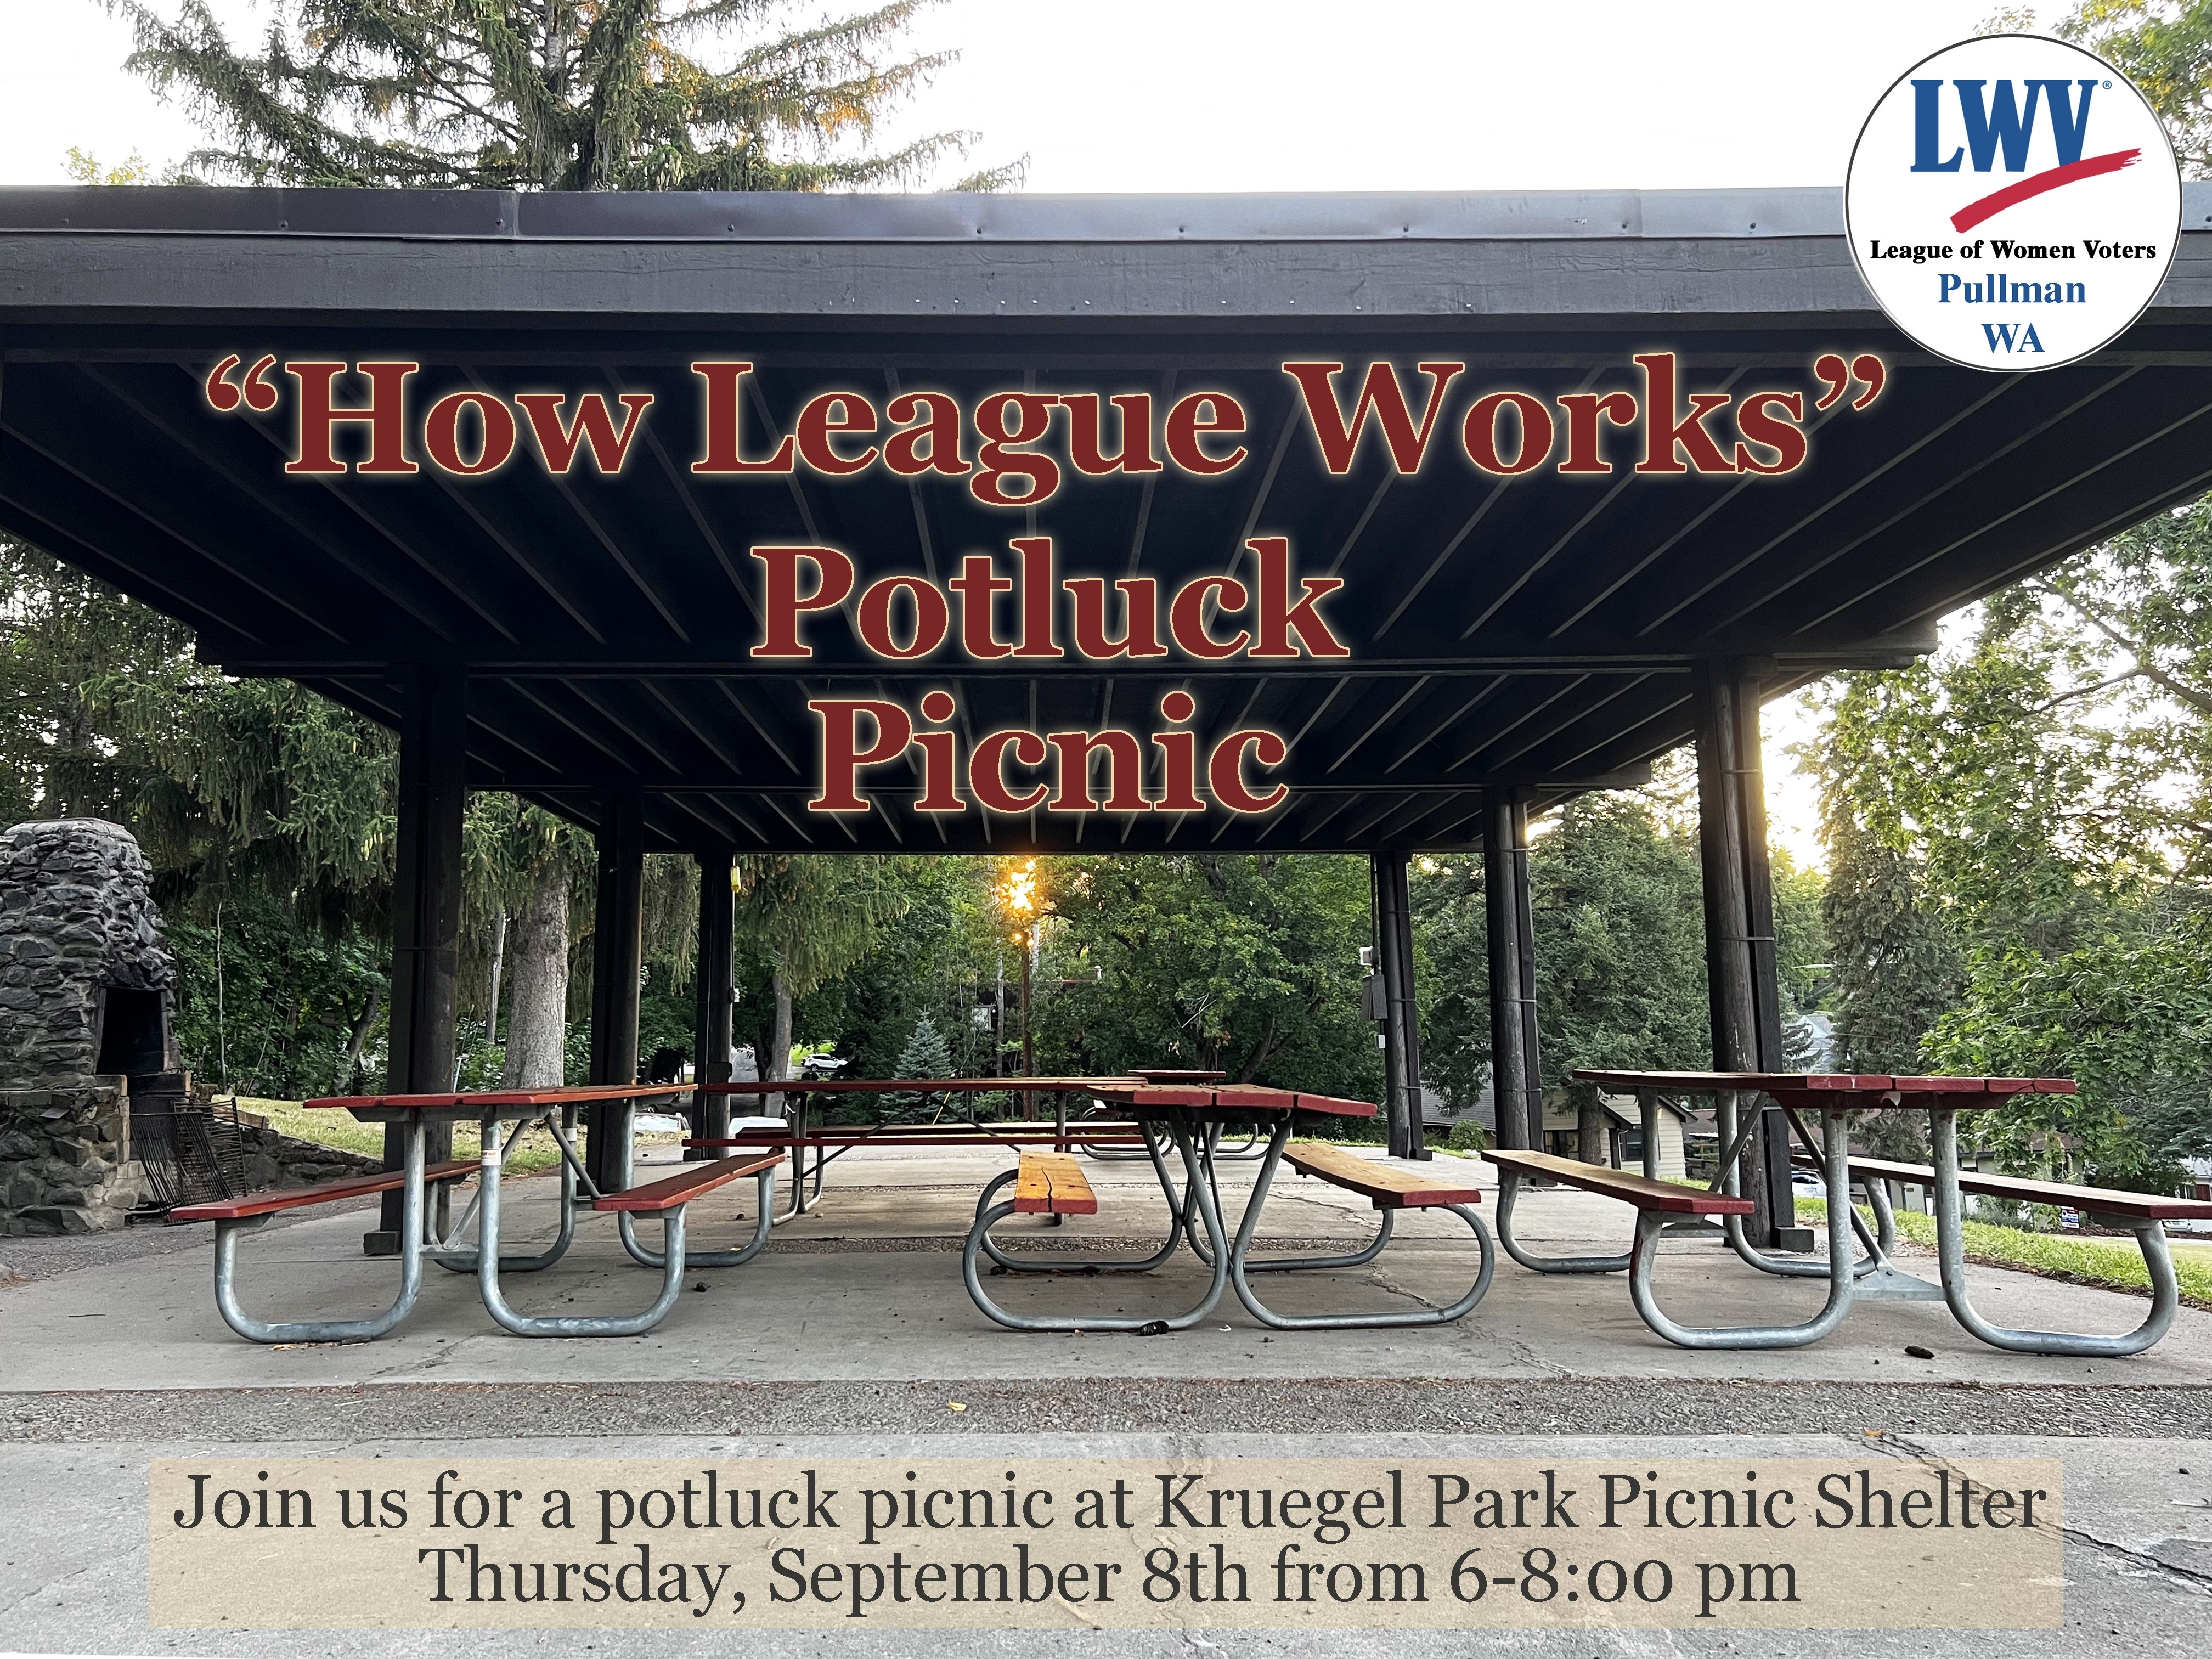 Picture of the Kruegel Park picnic shelter with the title saying How League Works” Potluck Picnic and Join us for a potluck picnic at Kruegel Park Picnic Shelter Thursday, September 8th from 6-8:00 pm.